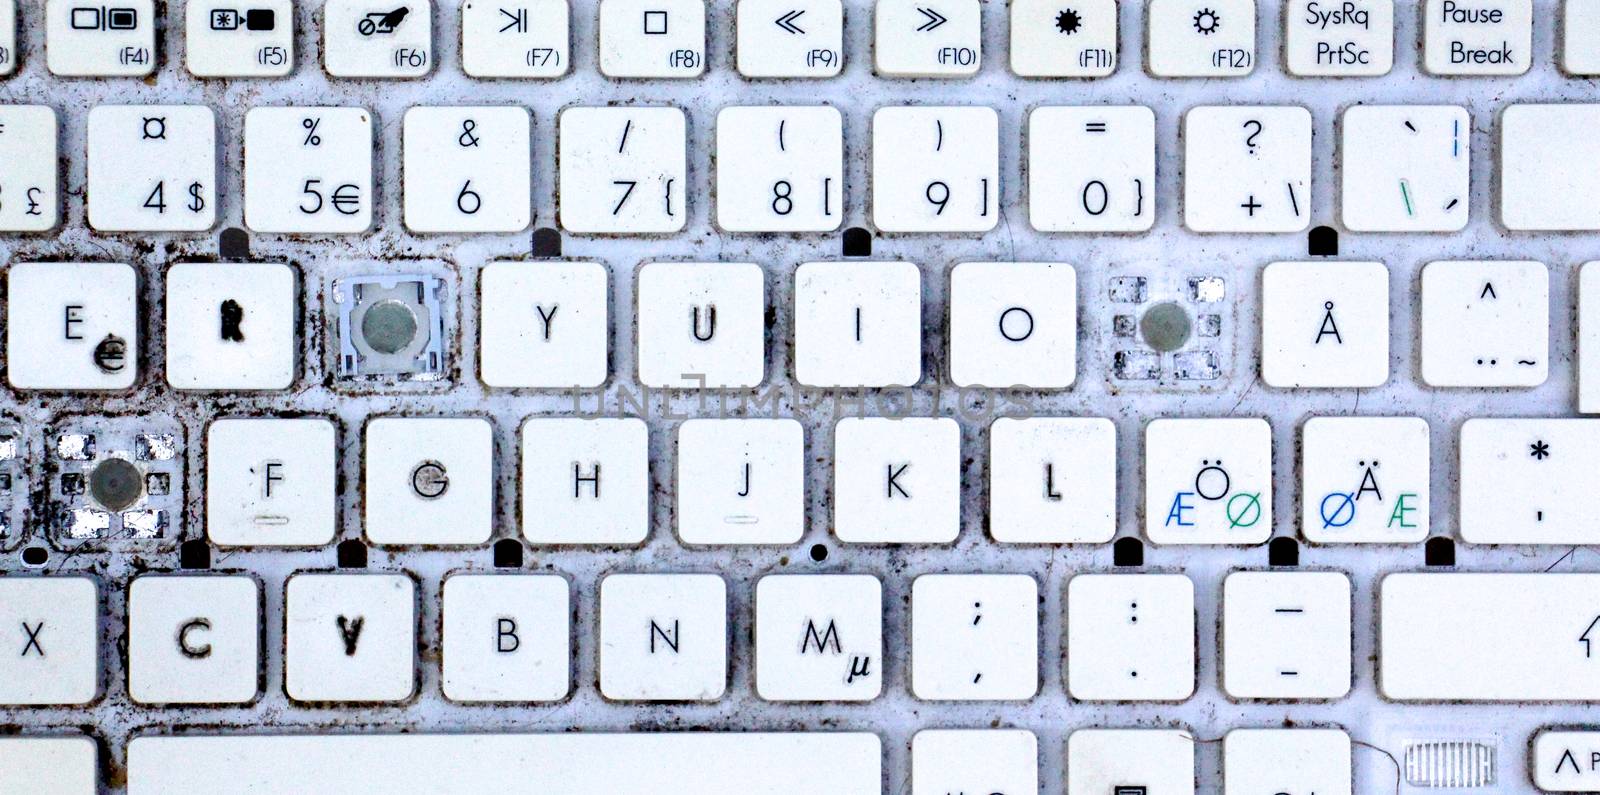 A close view of some keys on a dirty, yellowed keyboard.